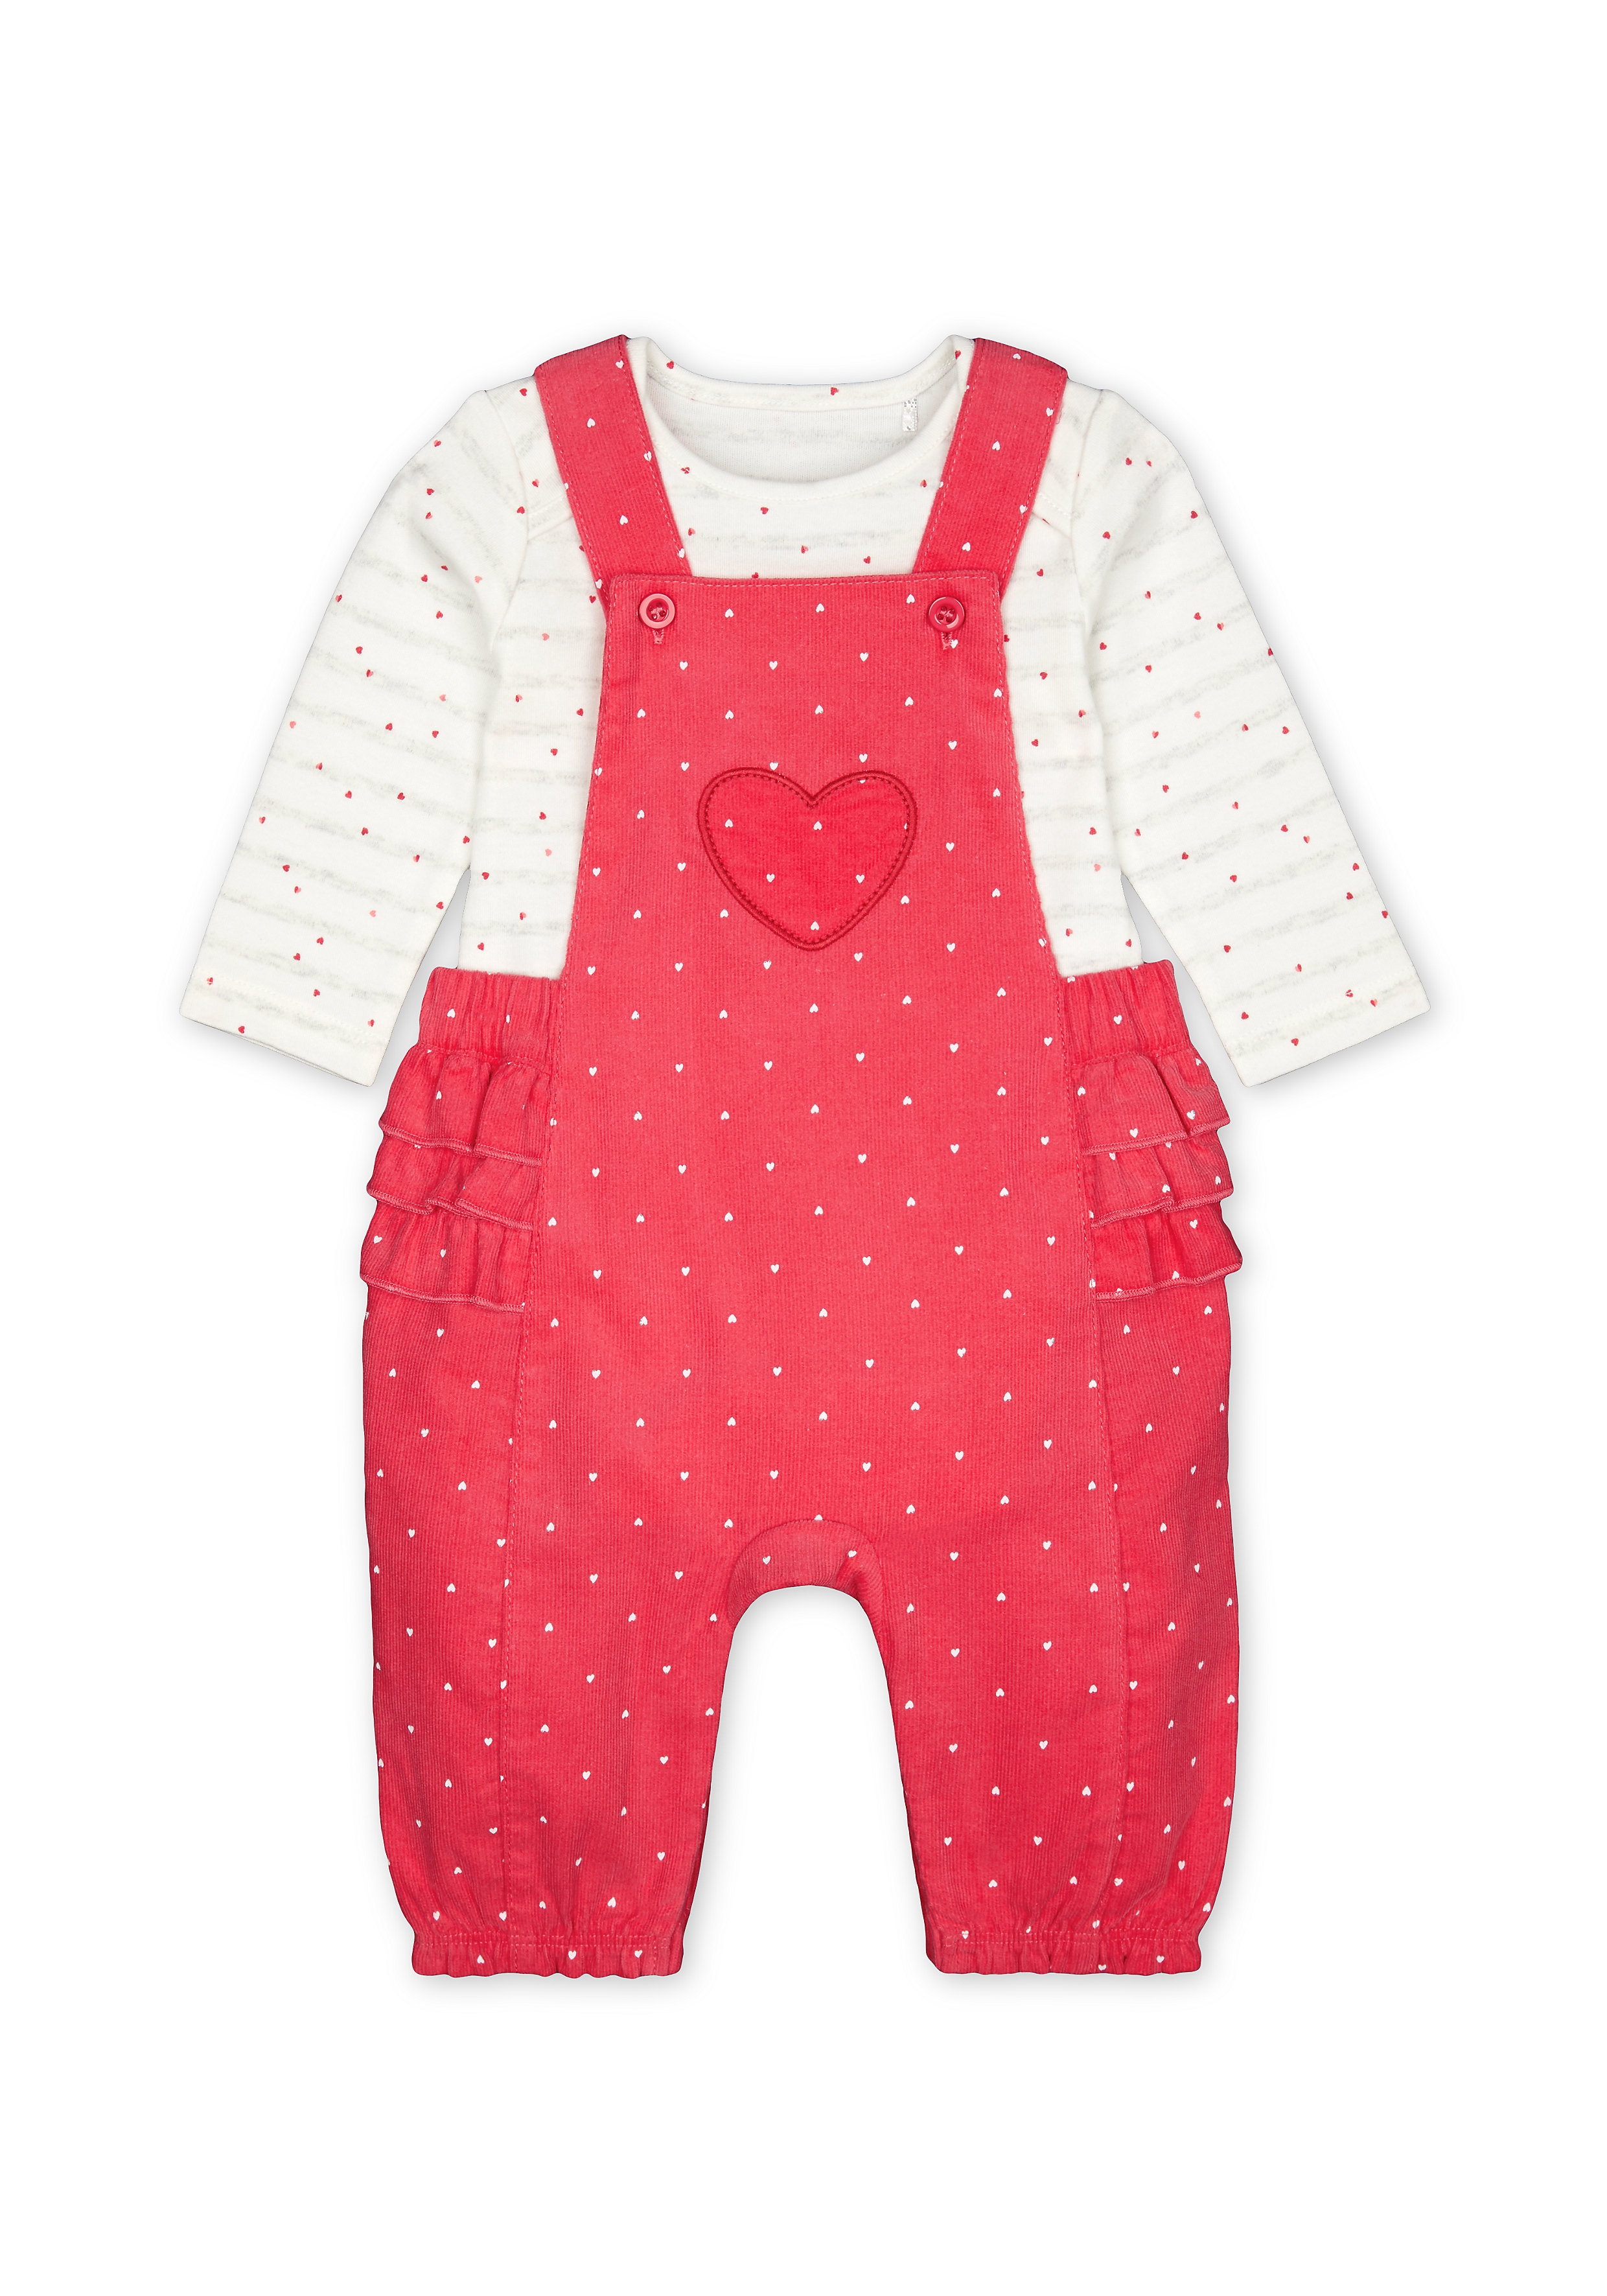 Girls Full Sleeves Cord Dungaree Set Polka Dot Print With Frill Details - Pink White